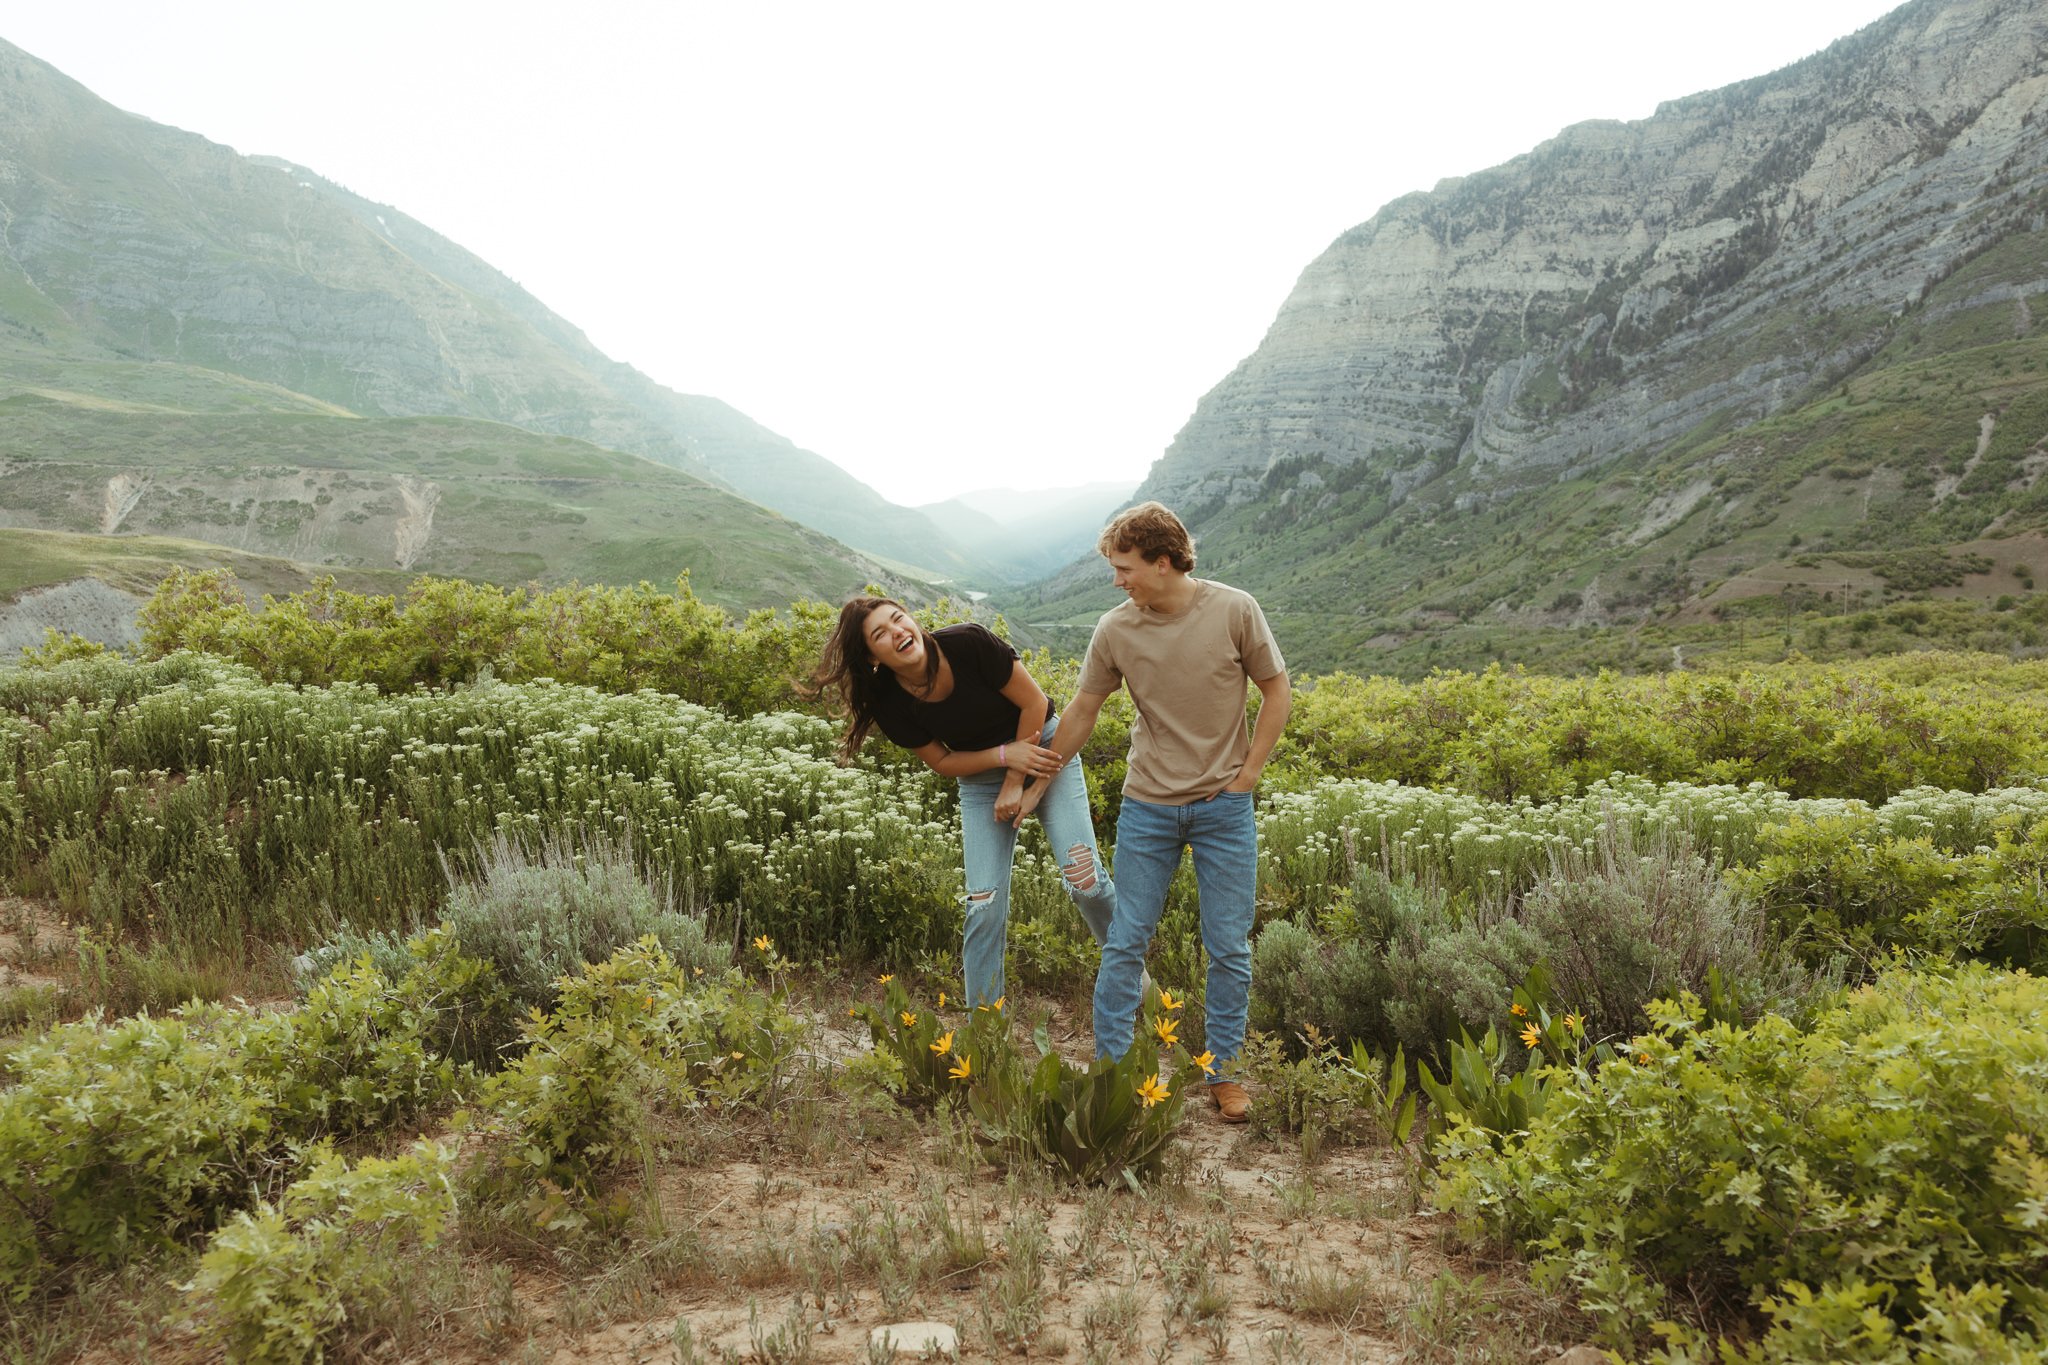 Spring-Provo-Canyon-Wildflowers-Engagement-Session-26